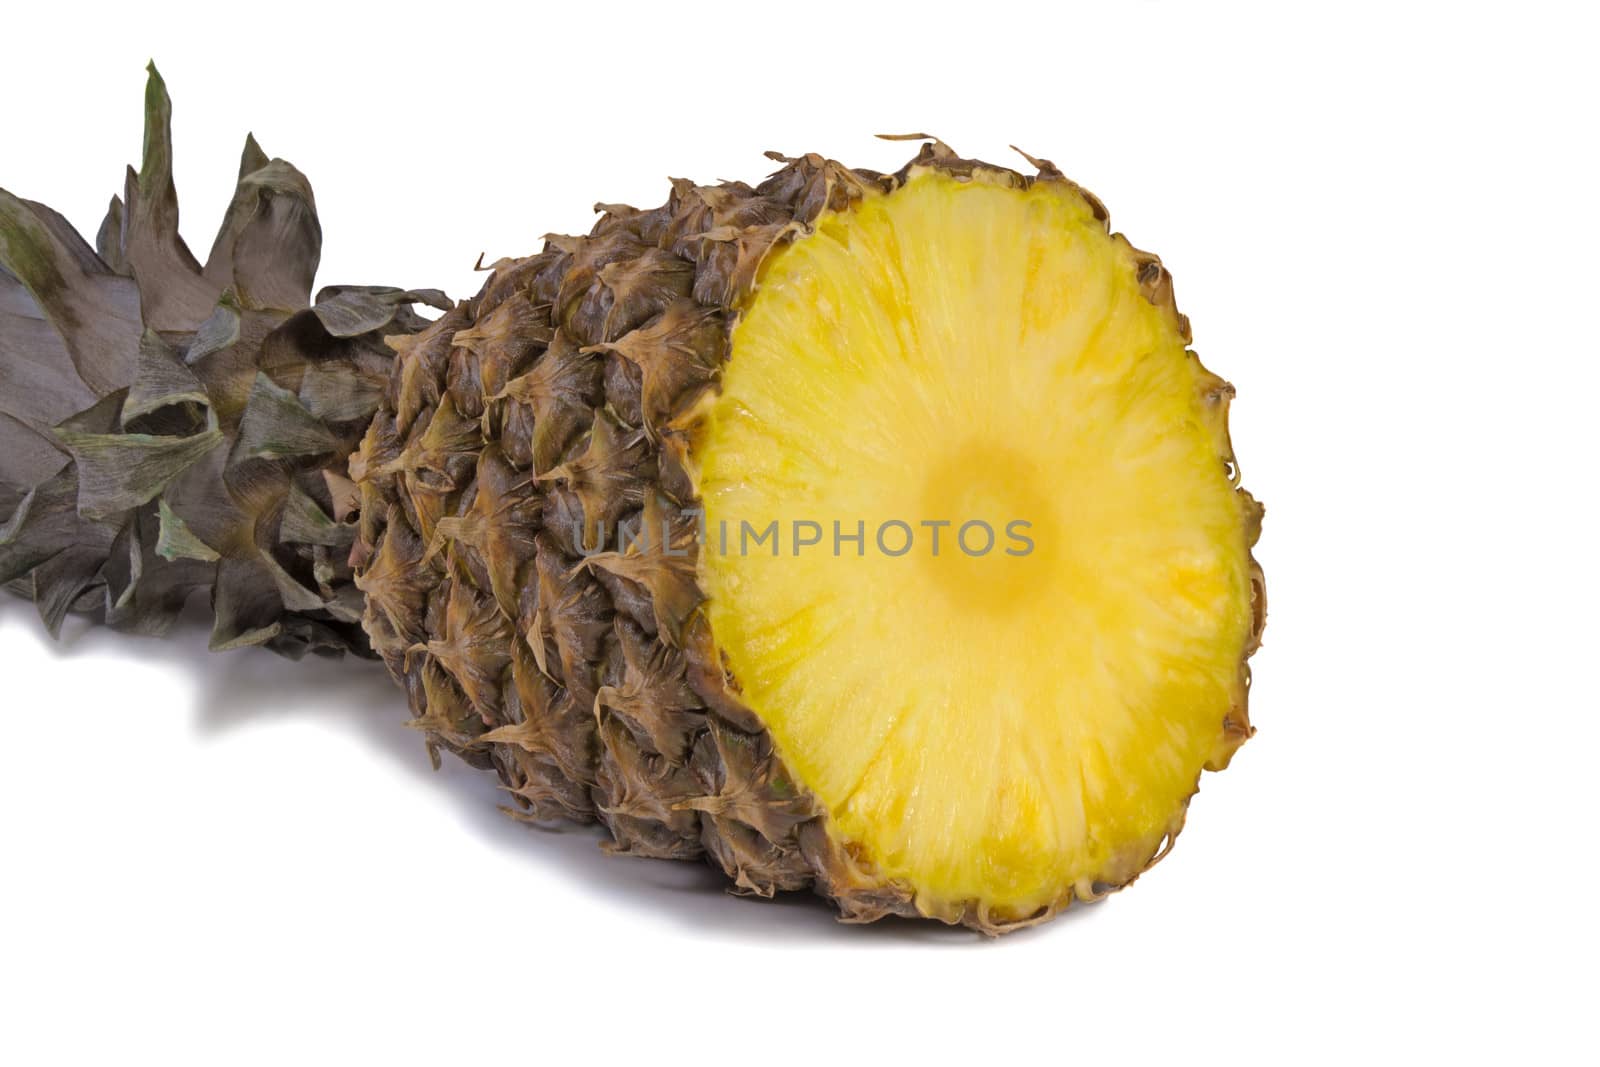 Cut the pineapple on a white background. by georgina198